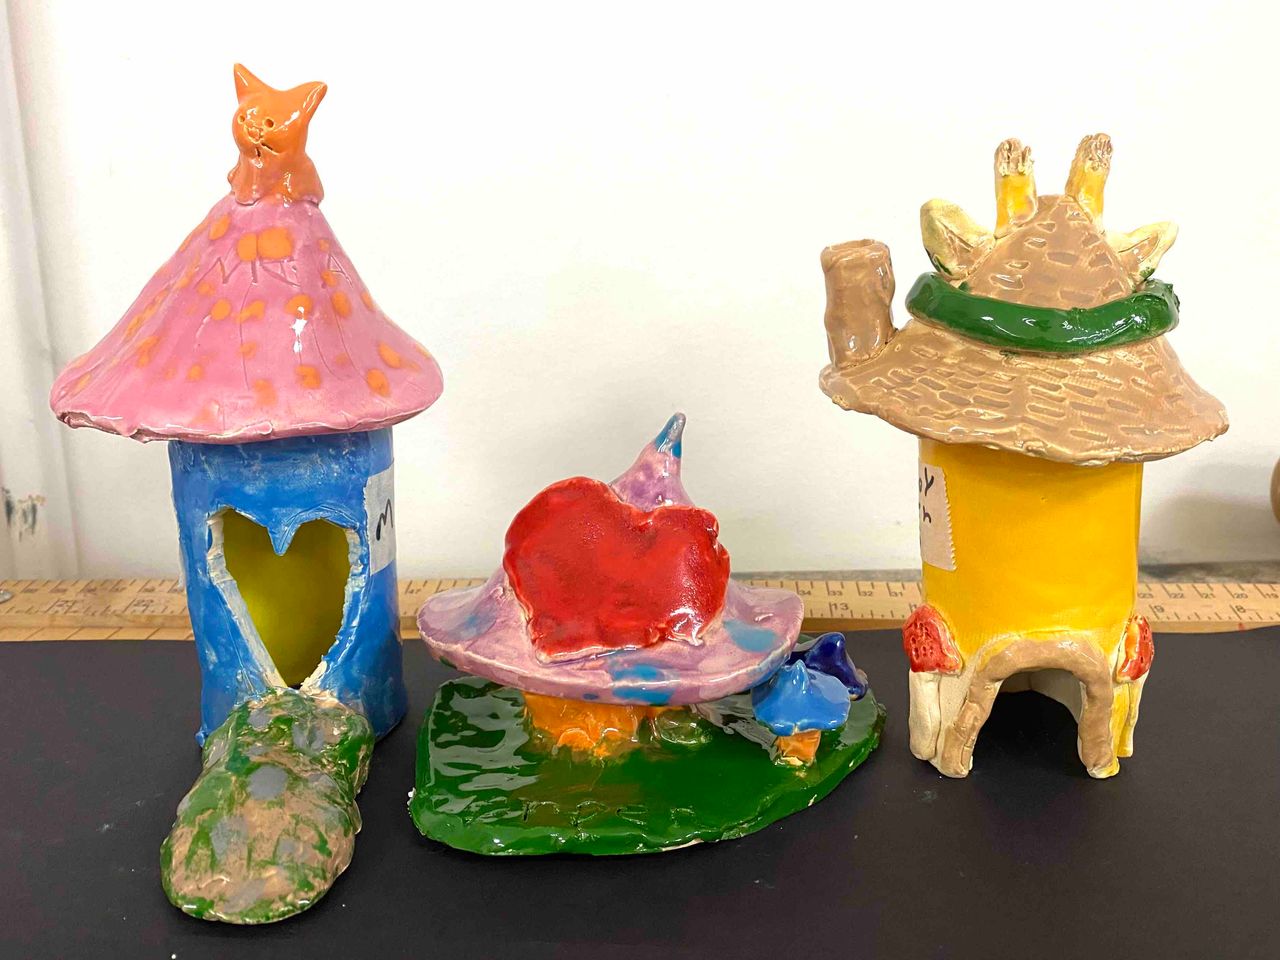 Three young artist's interpretations of gnome homes made out of clay and fired in a kiln.